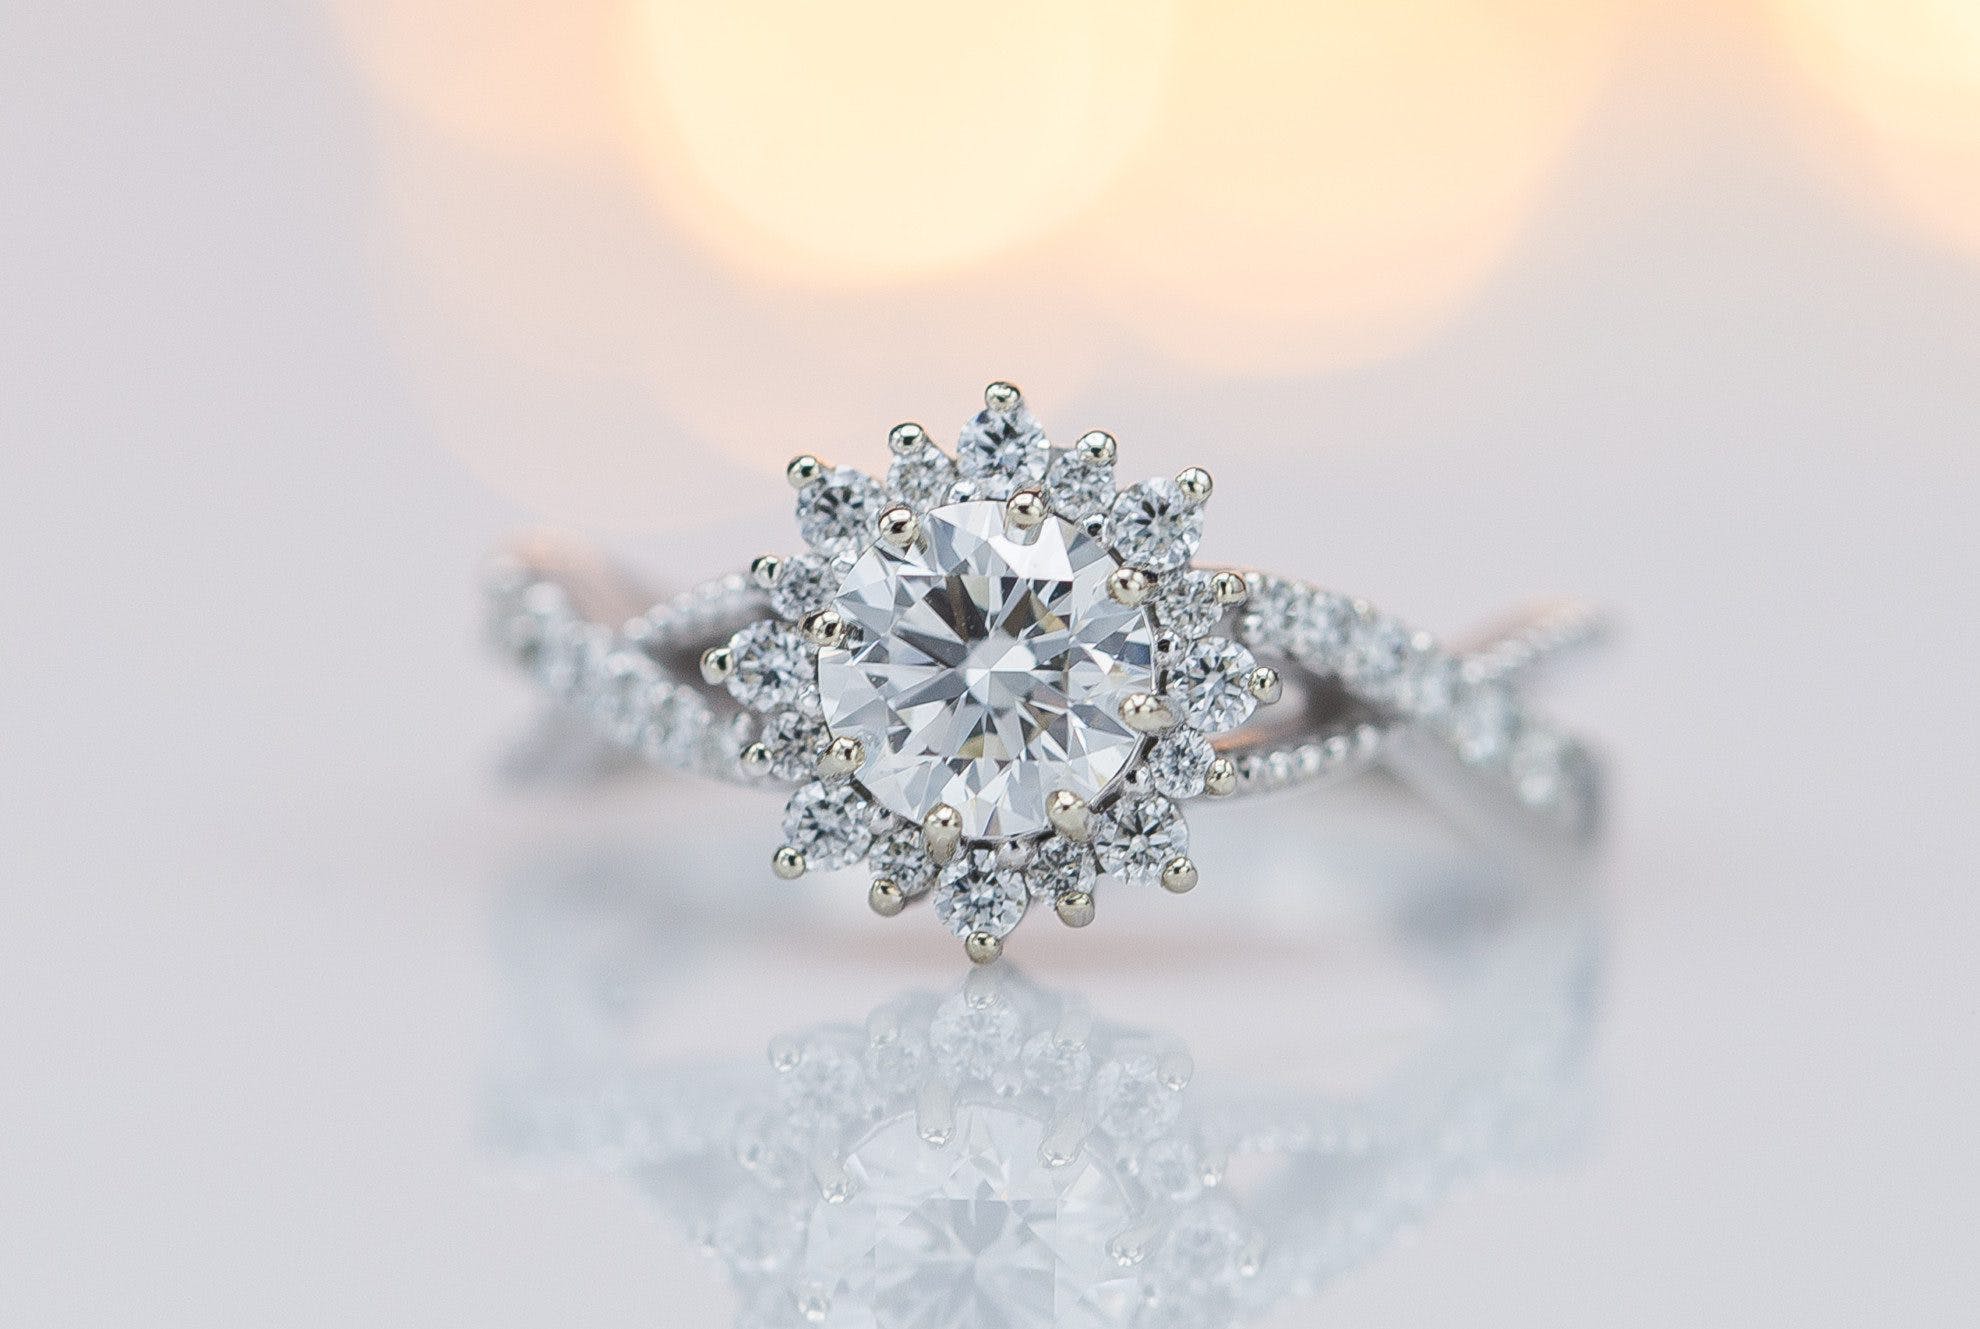 Engagement Ring Setting: What’s Your Style?